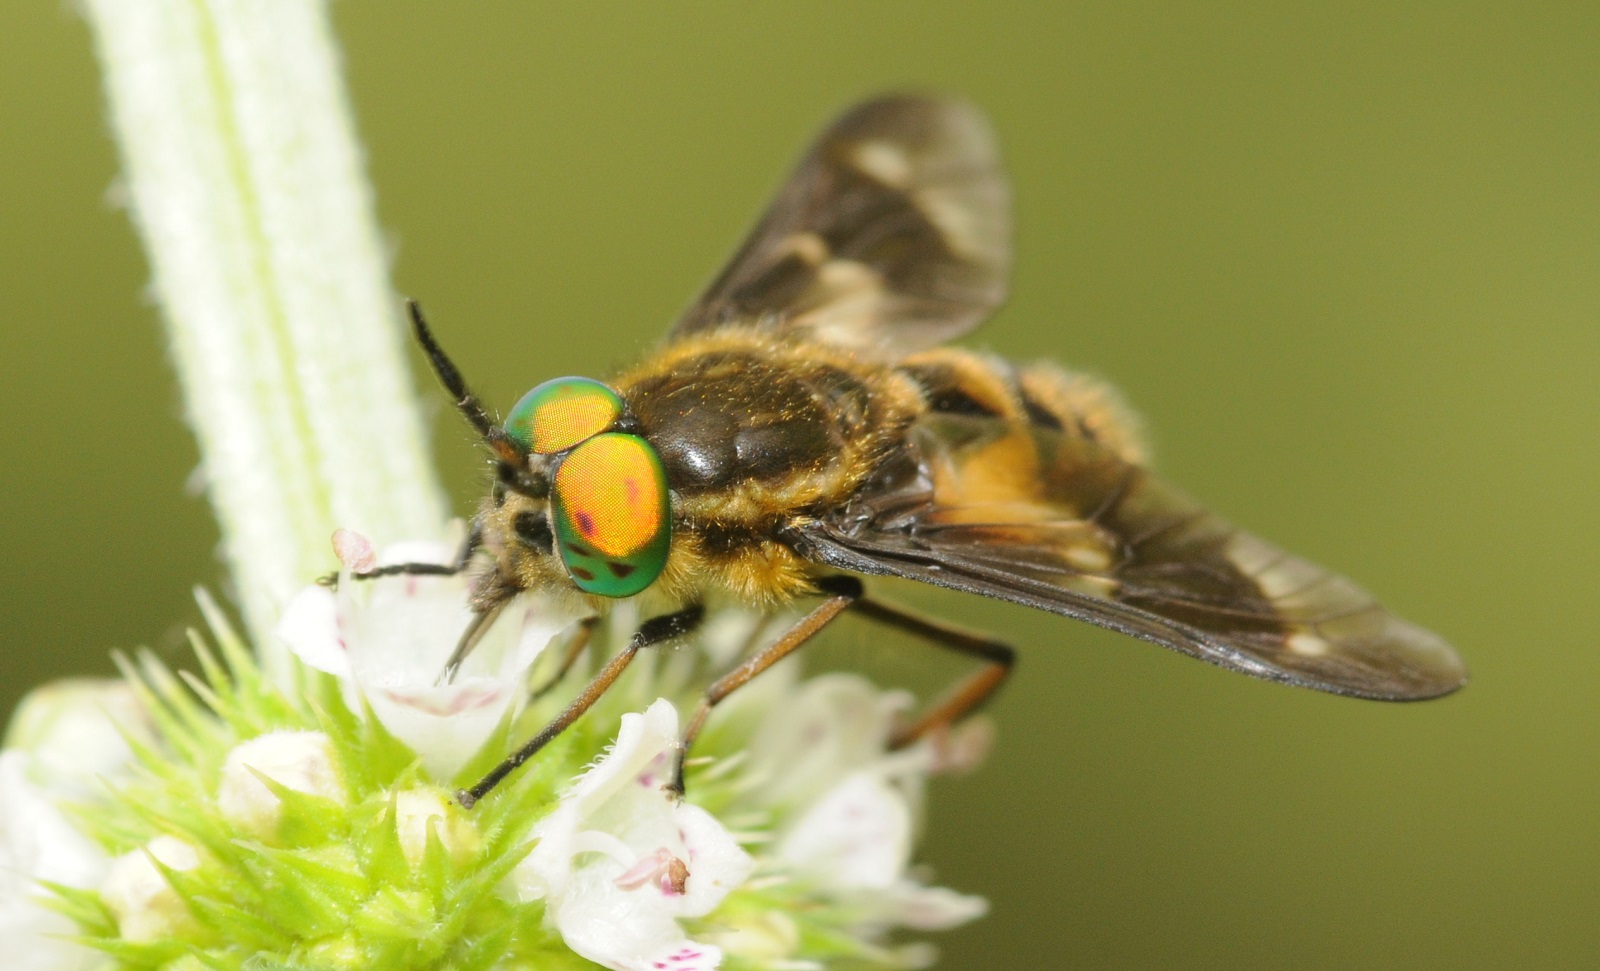 What do horse flies eat - blindness feed on nectar